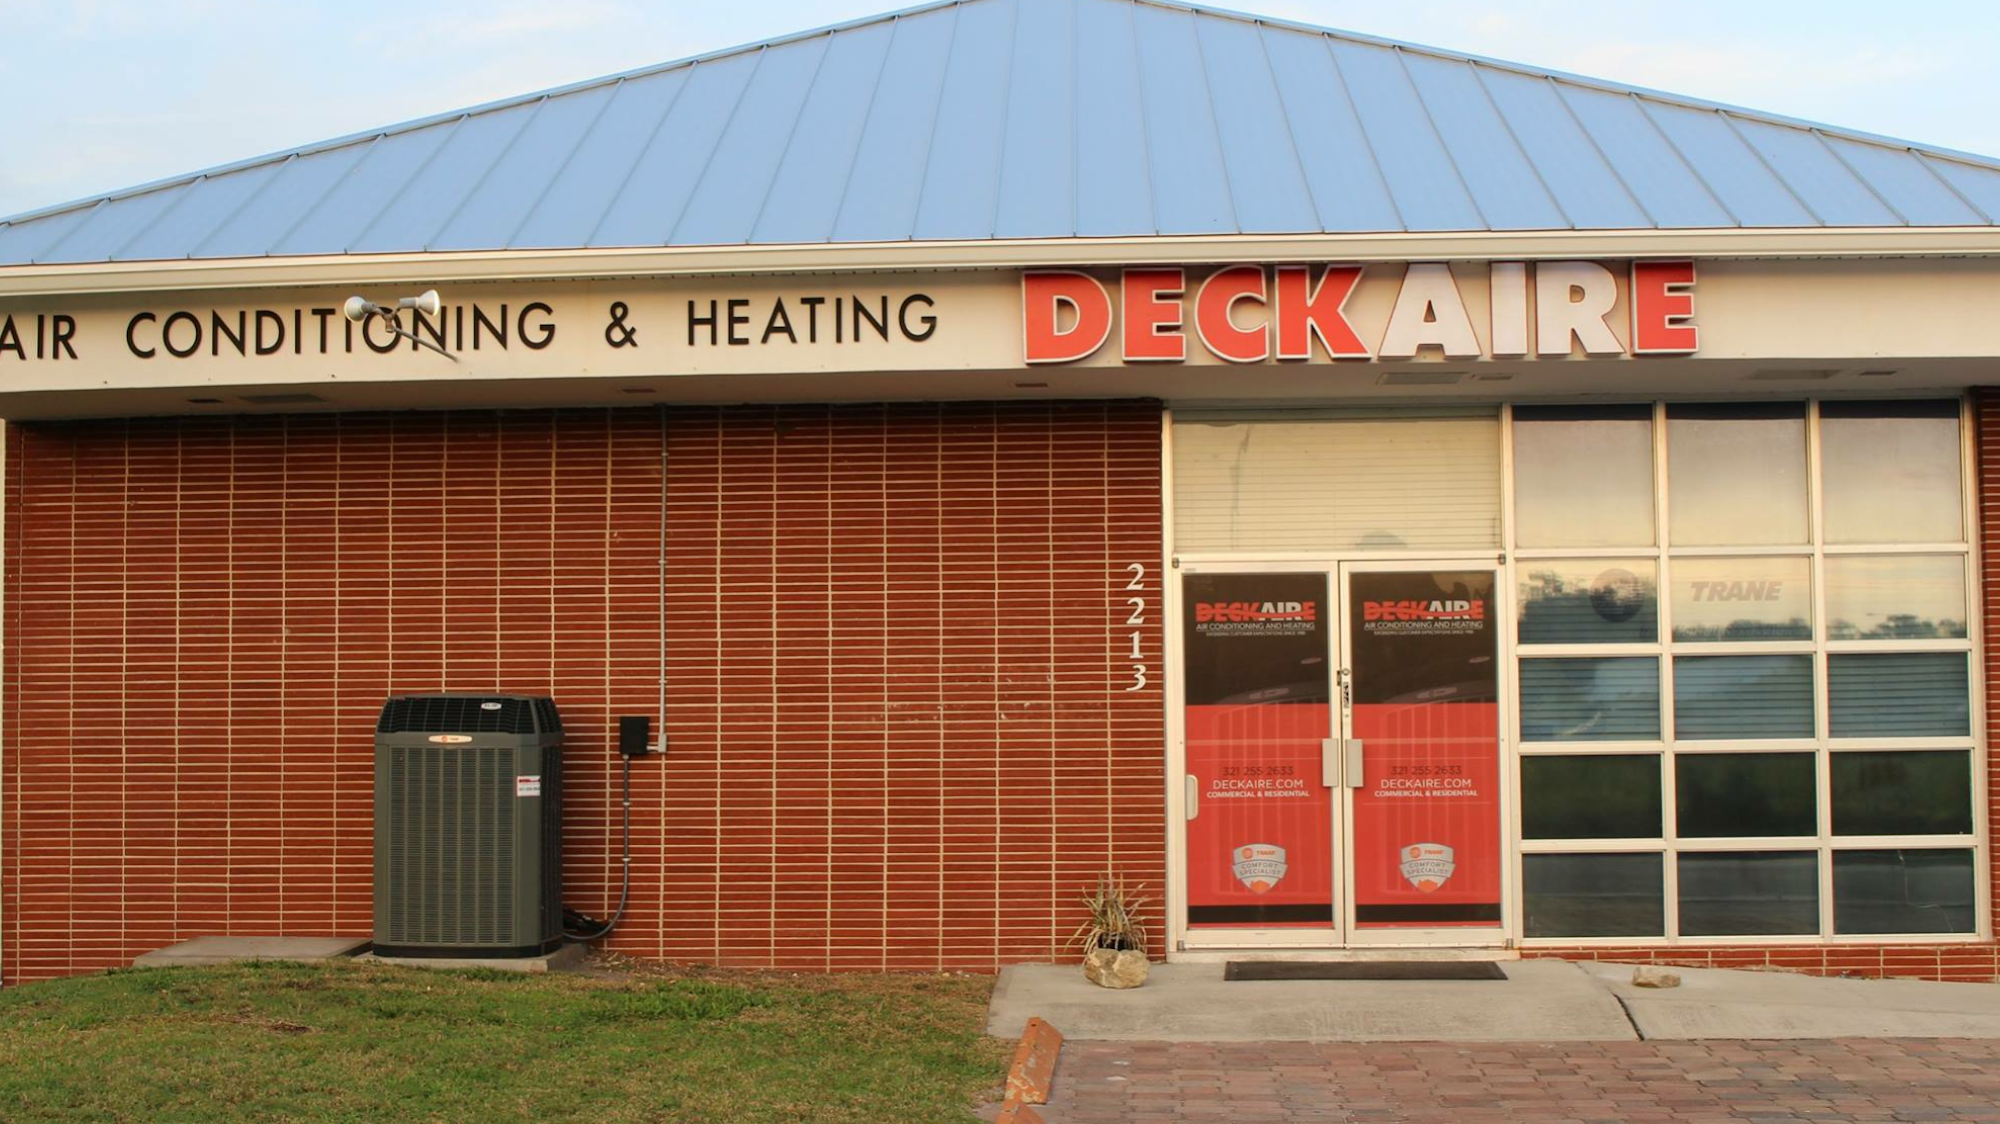 Deck-Aire Air Conditioning & Heating